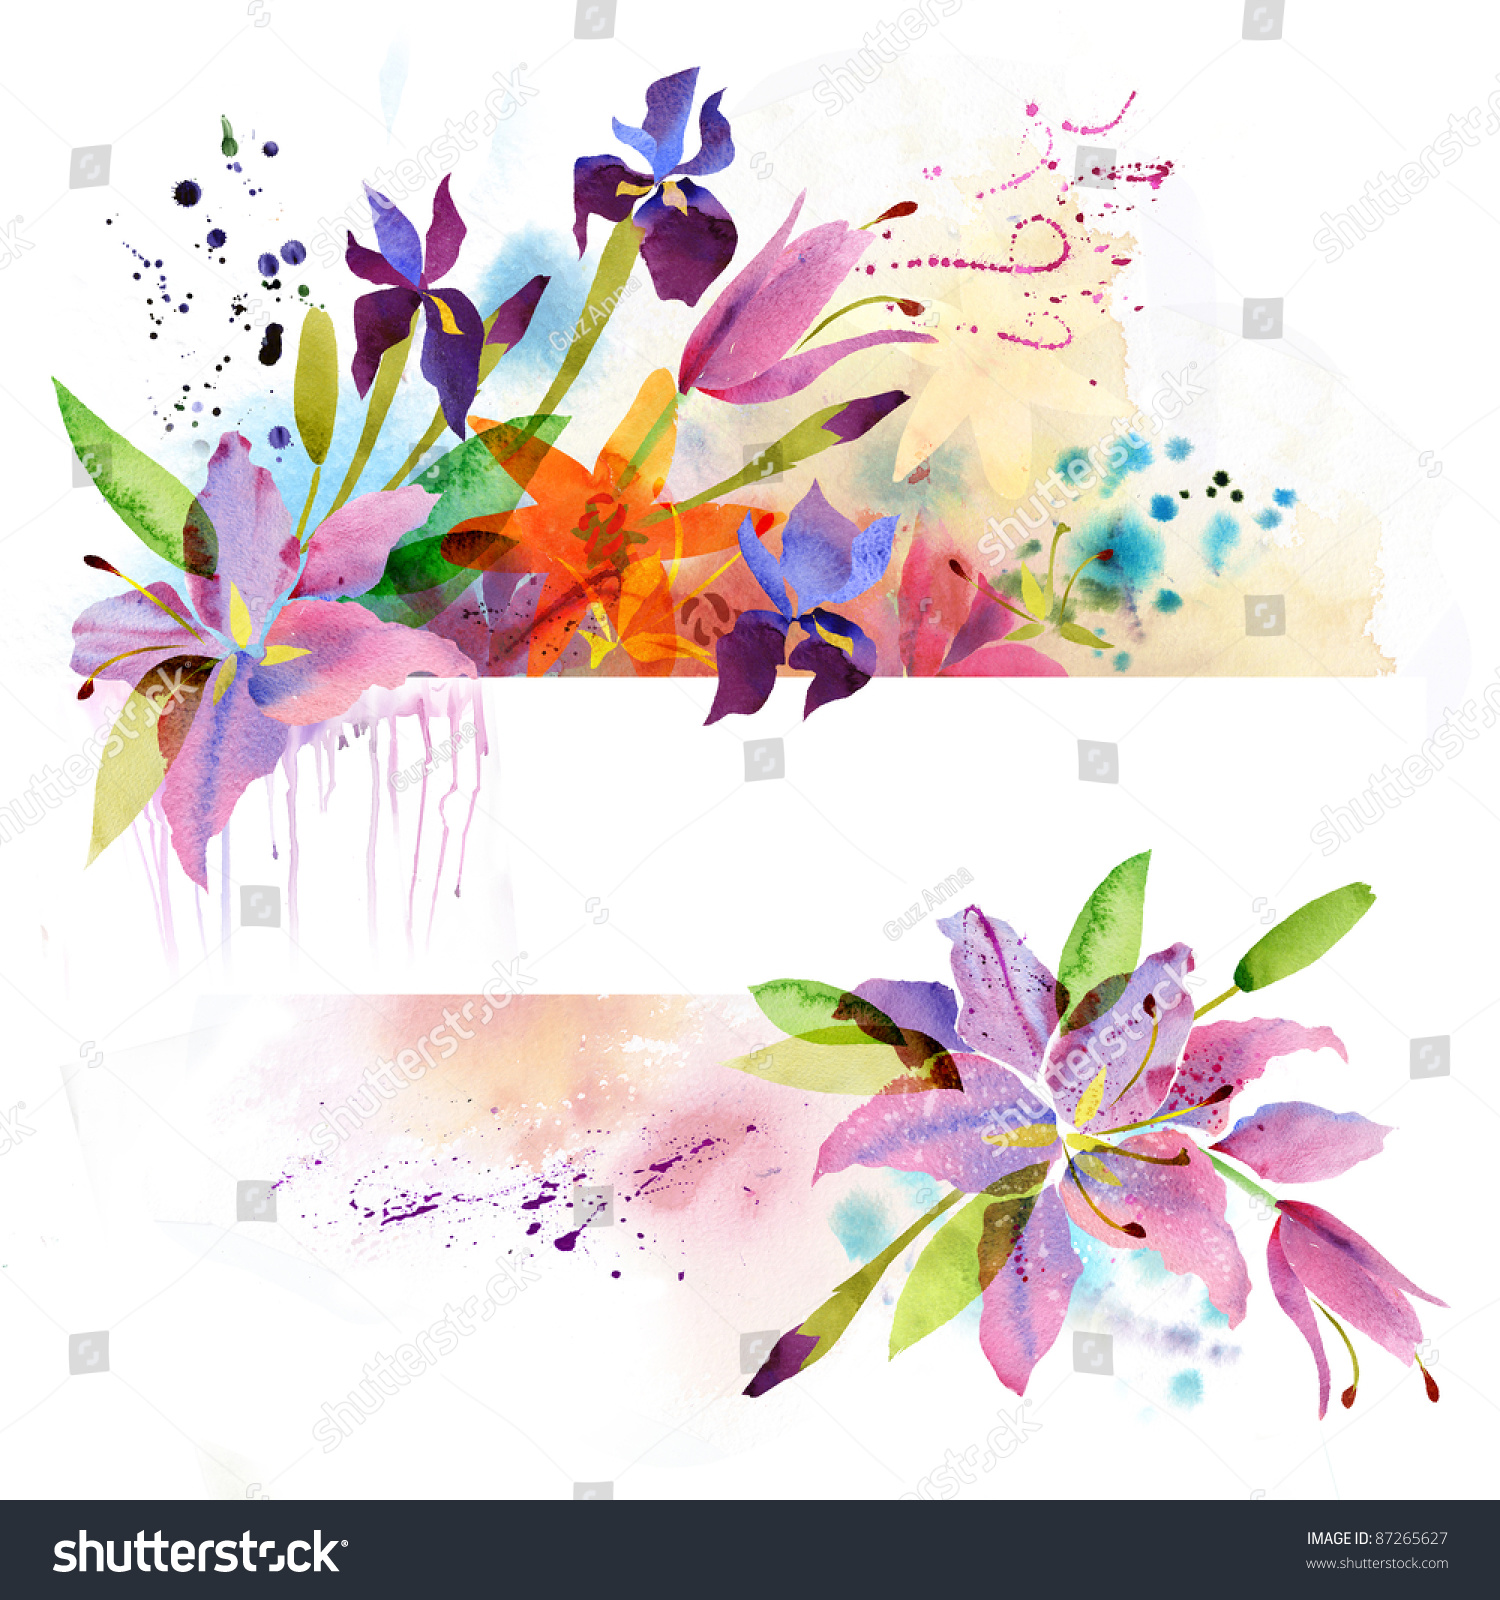 Floral Background With Watercolor Flowers Stock Photo 87265627 ...